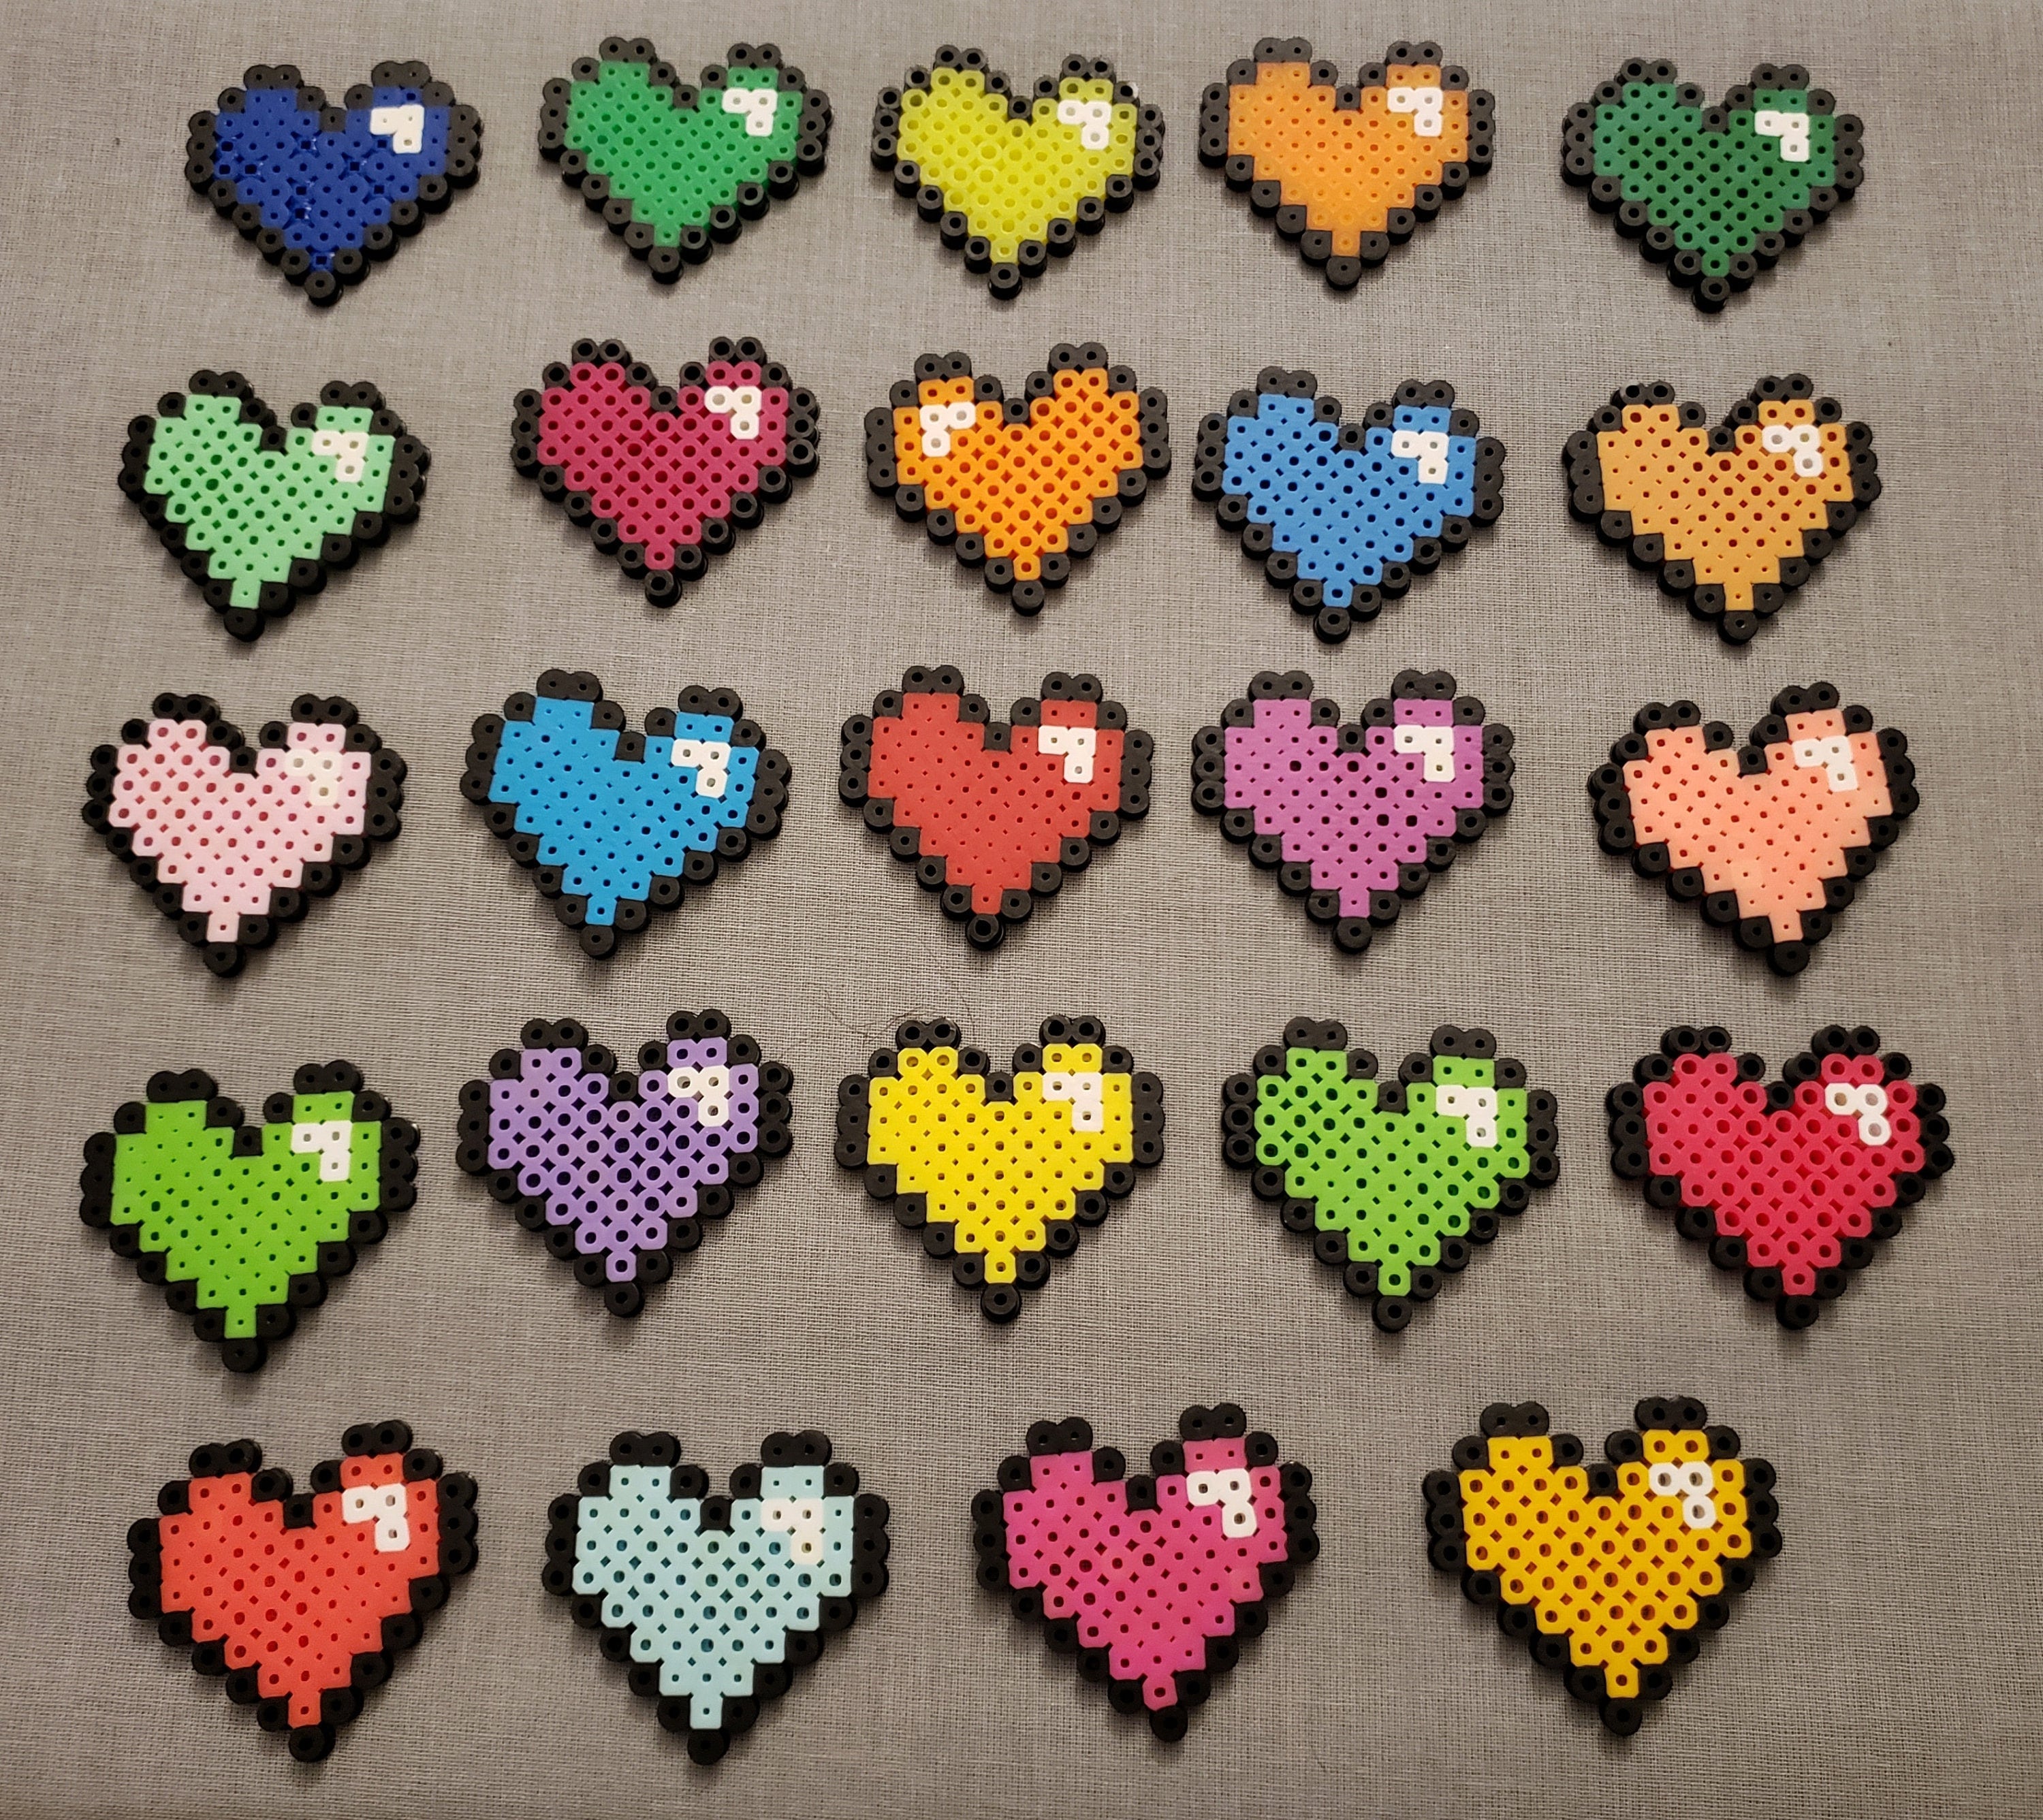 Four Fuse Bead Patterns Sure to Make Your Heart Melt